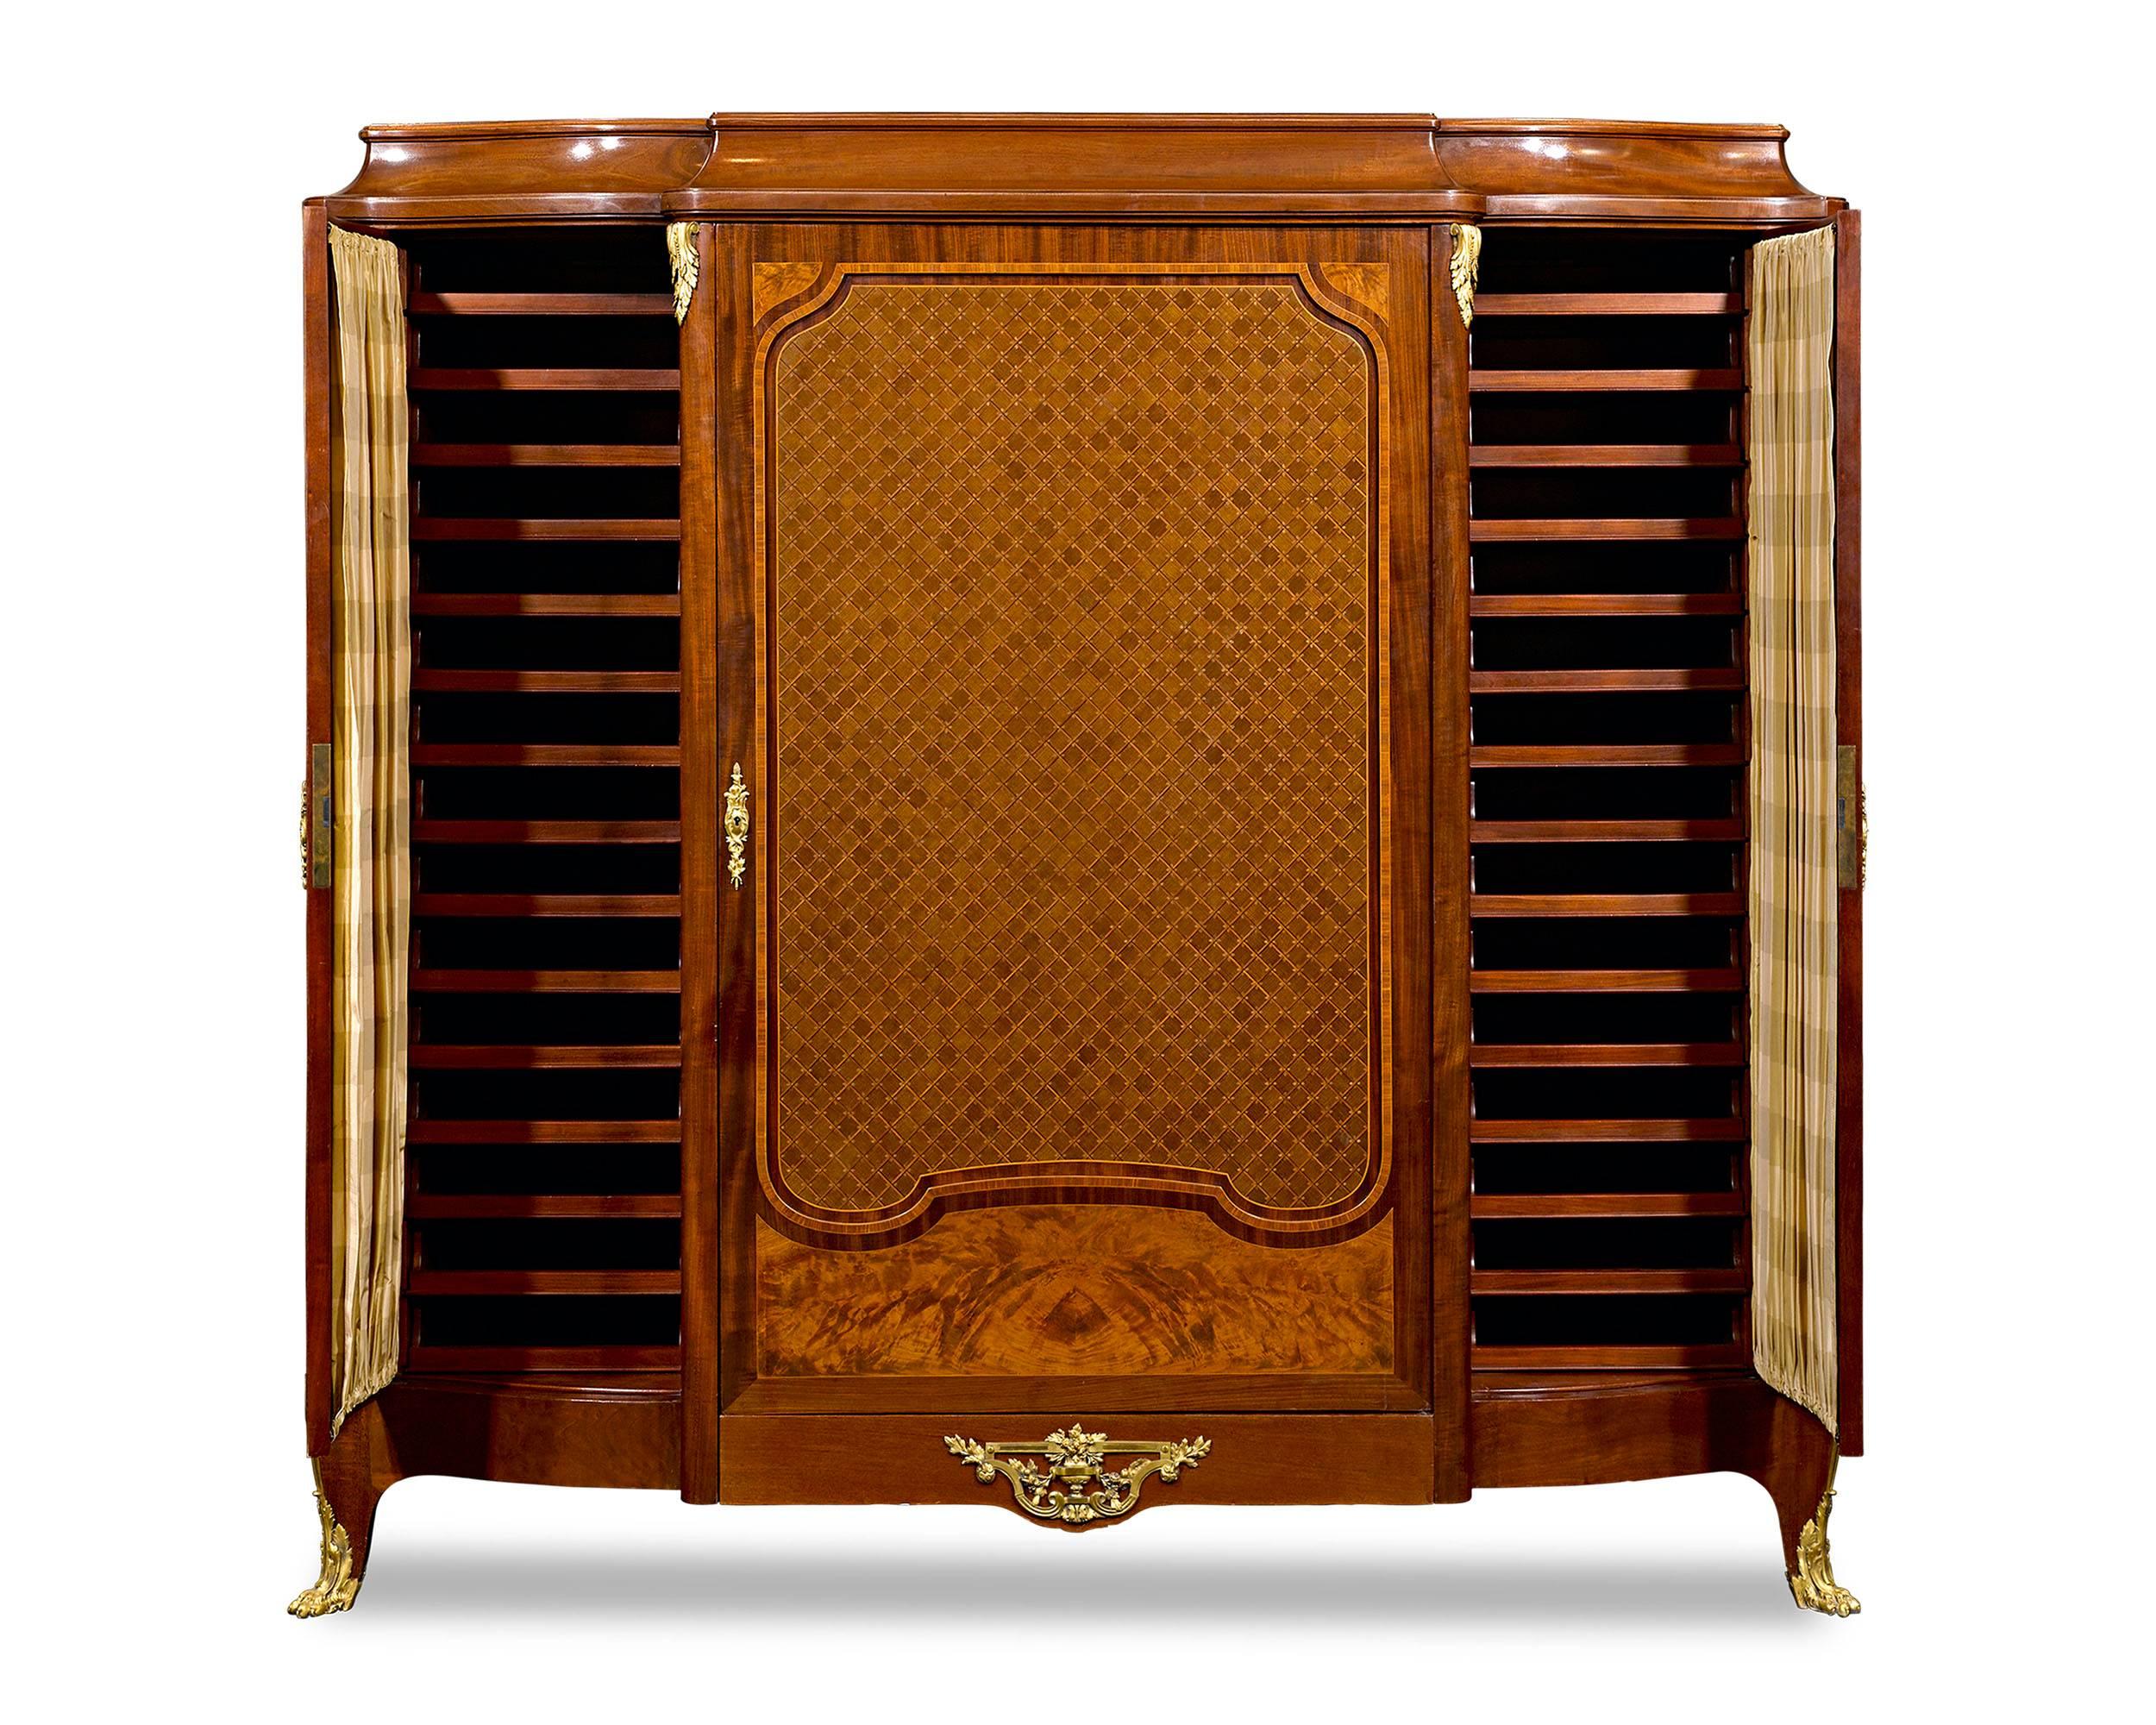 Sumptuous doré bronze and elaborate marquetry distinguish this important Louis XV-style mahogany library cabinet by Francois Linke, the most celebrated and influential ébéniste of the late 19th and early 20th centuries. Impeccable in both style and